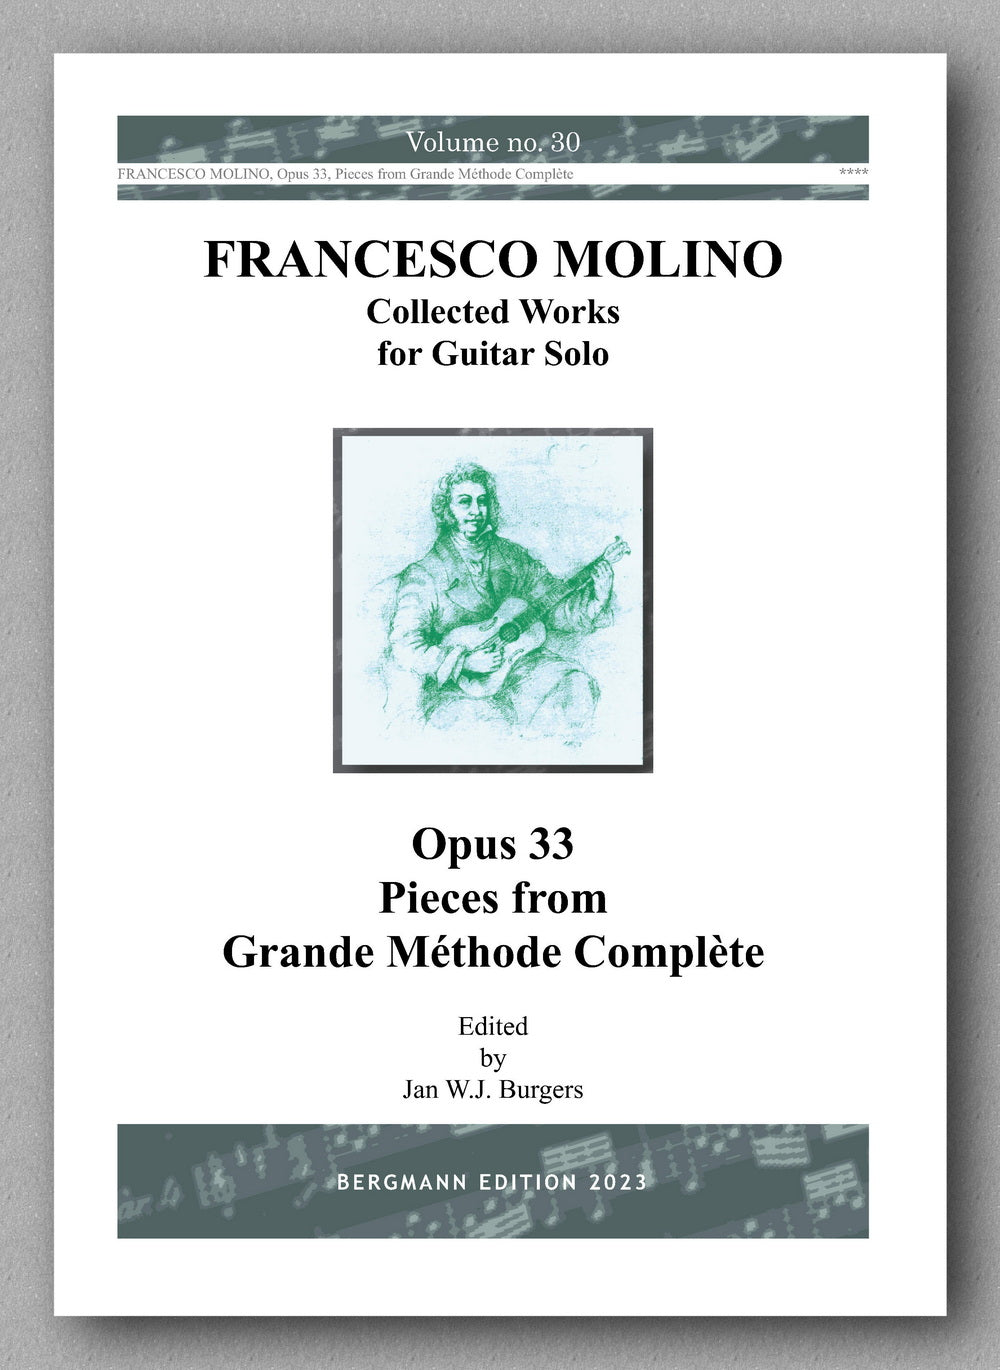 Molino, Collected Works for Guitar Solo, Vol. 30 - preview of the cover